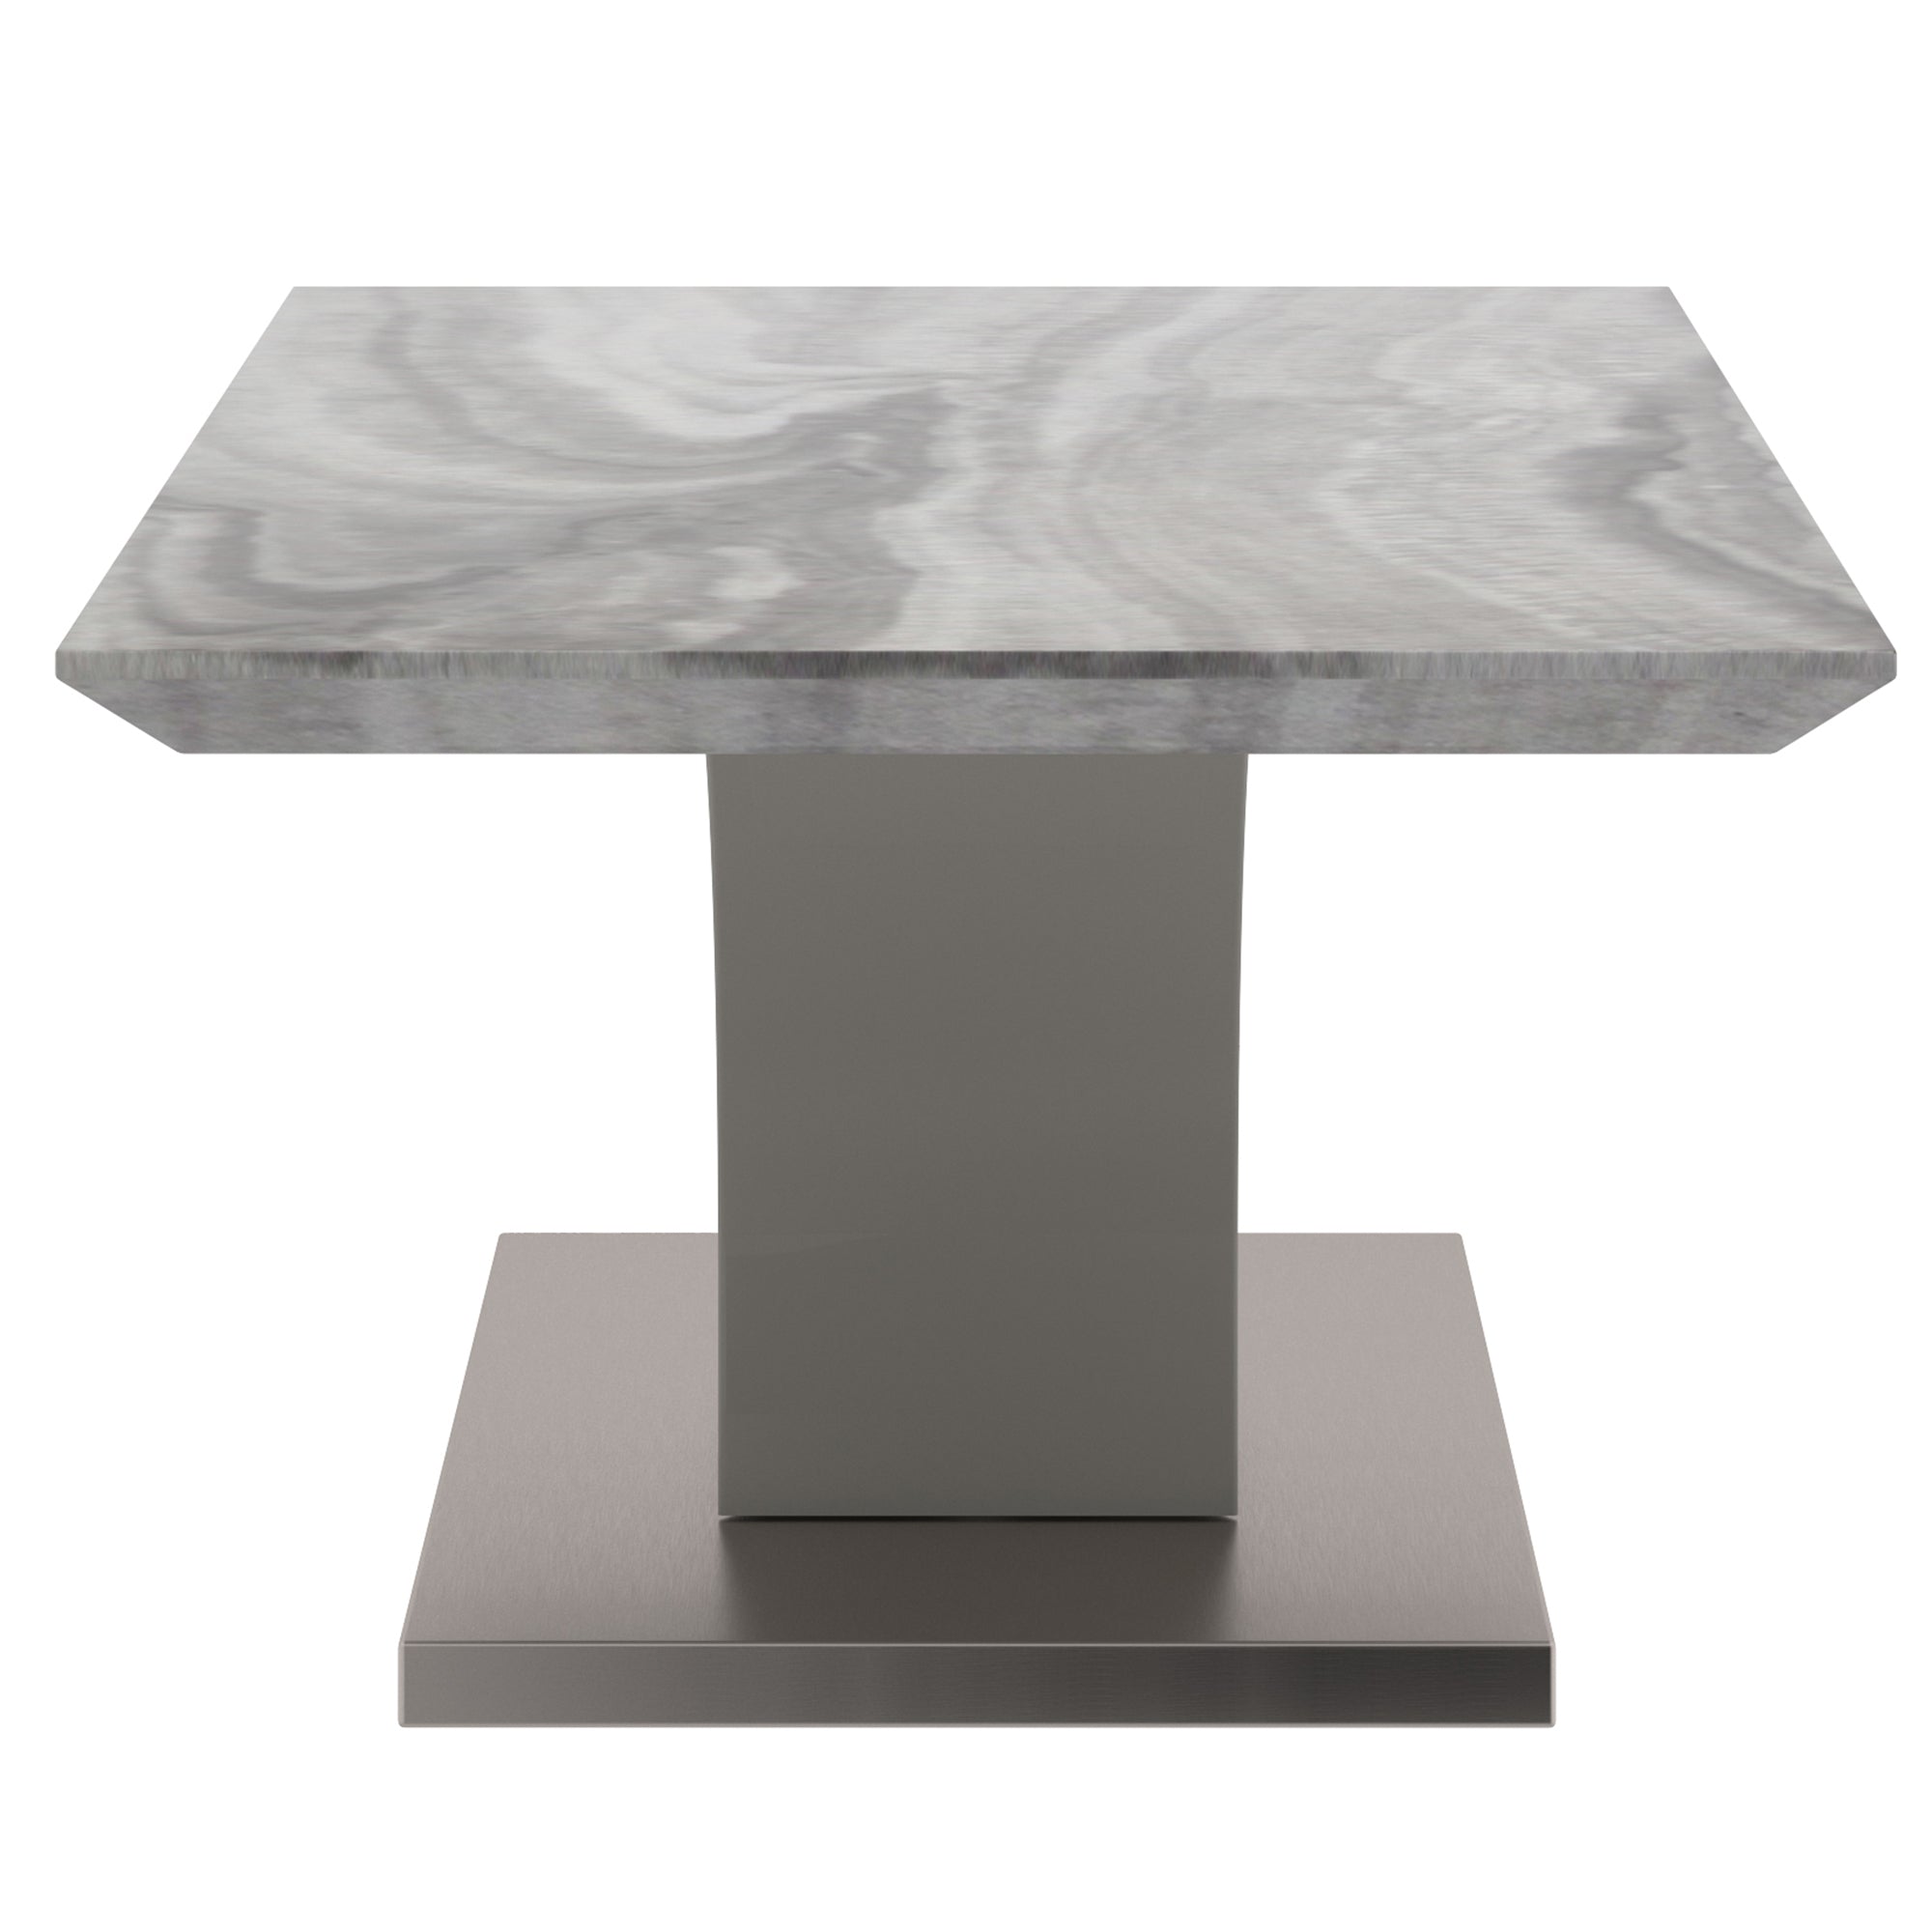 Napoli Coffee Table in Light Grey